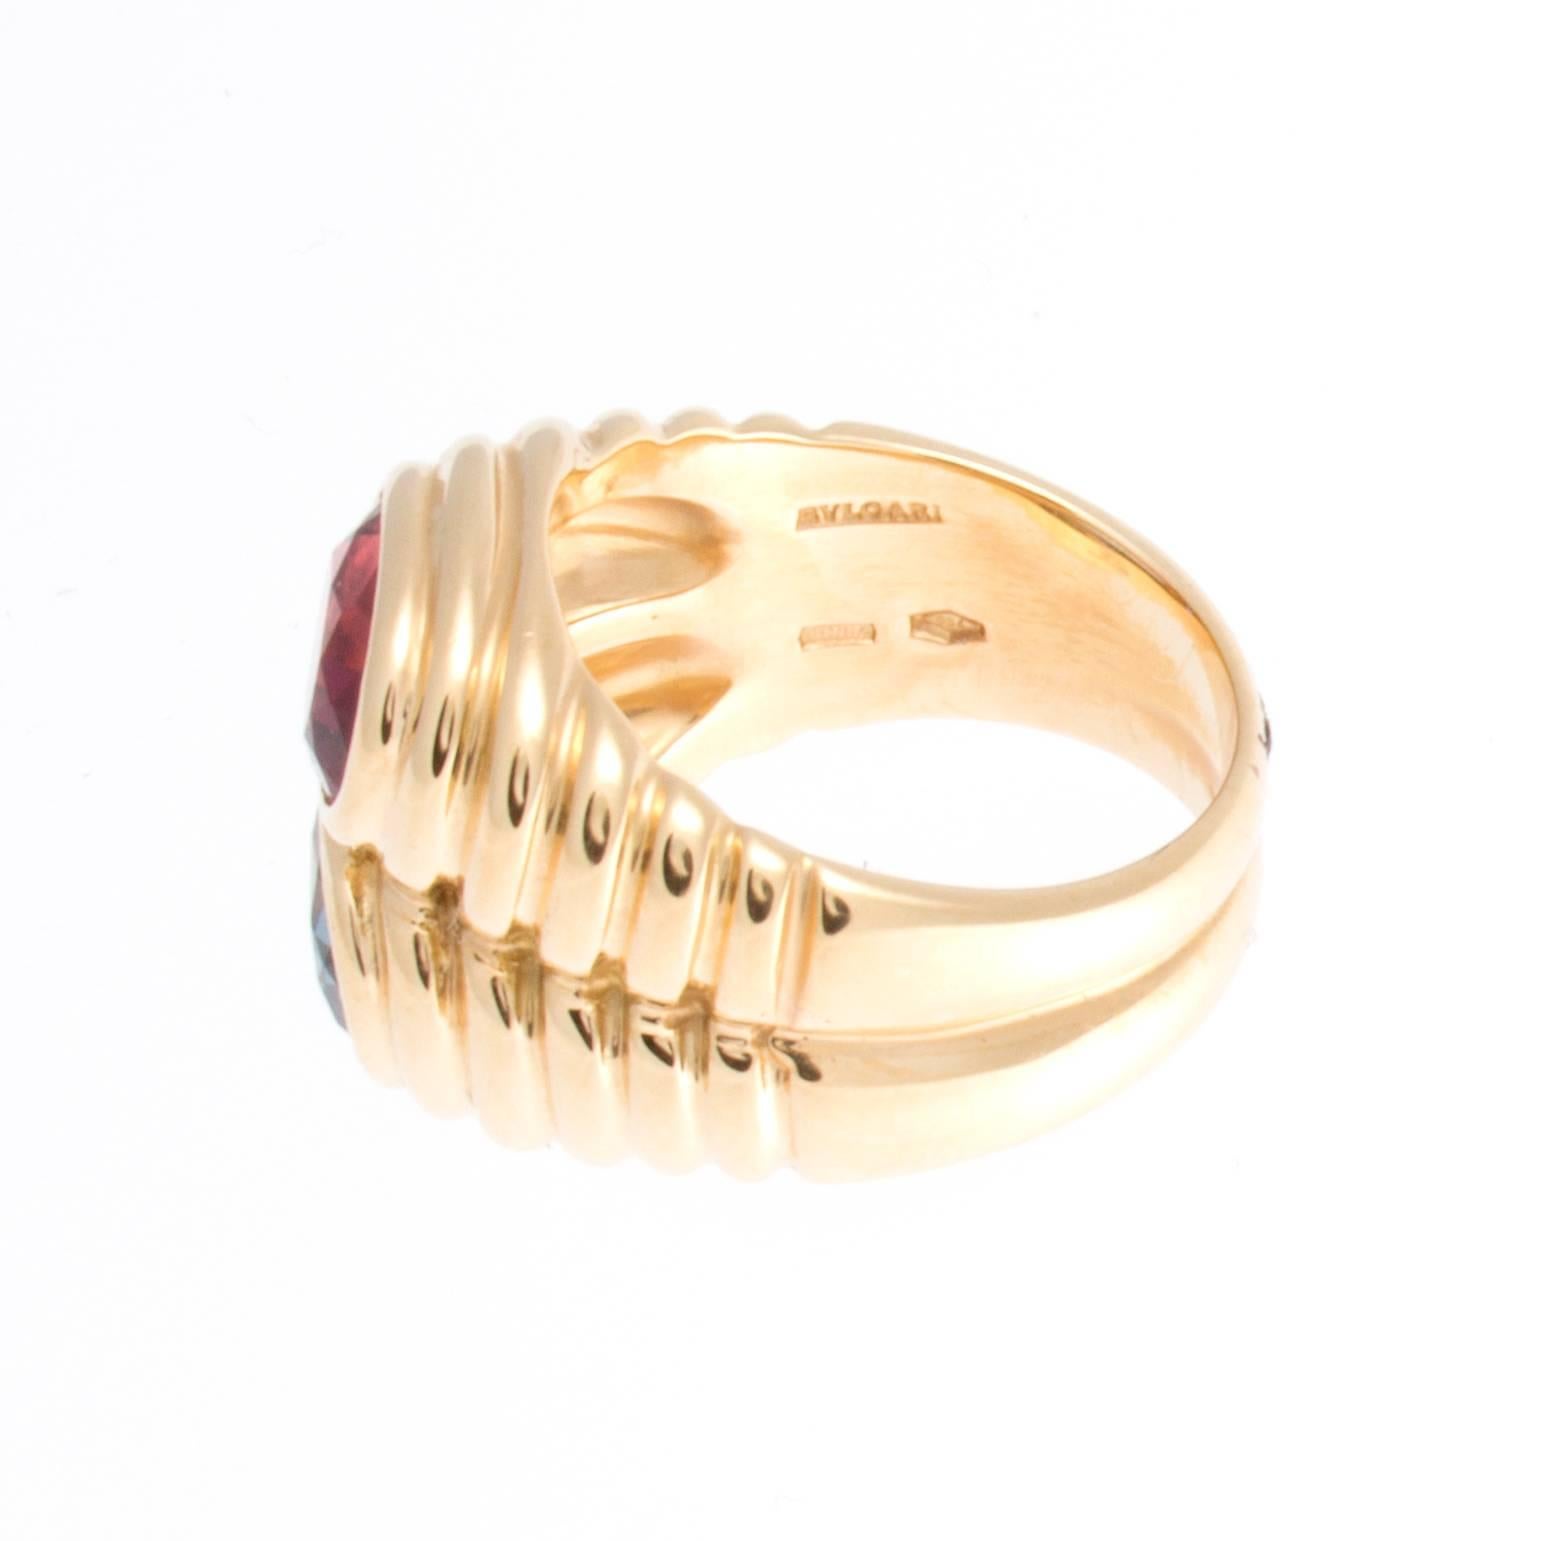 Stylish and colorful from Bulgari. Designed with a red rubelite and a blue topaz set amid rolling contours of 18k gold. Signed Bvlgari. Ring size 6 and may be resized.
